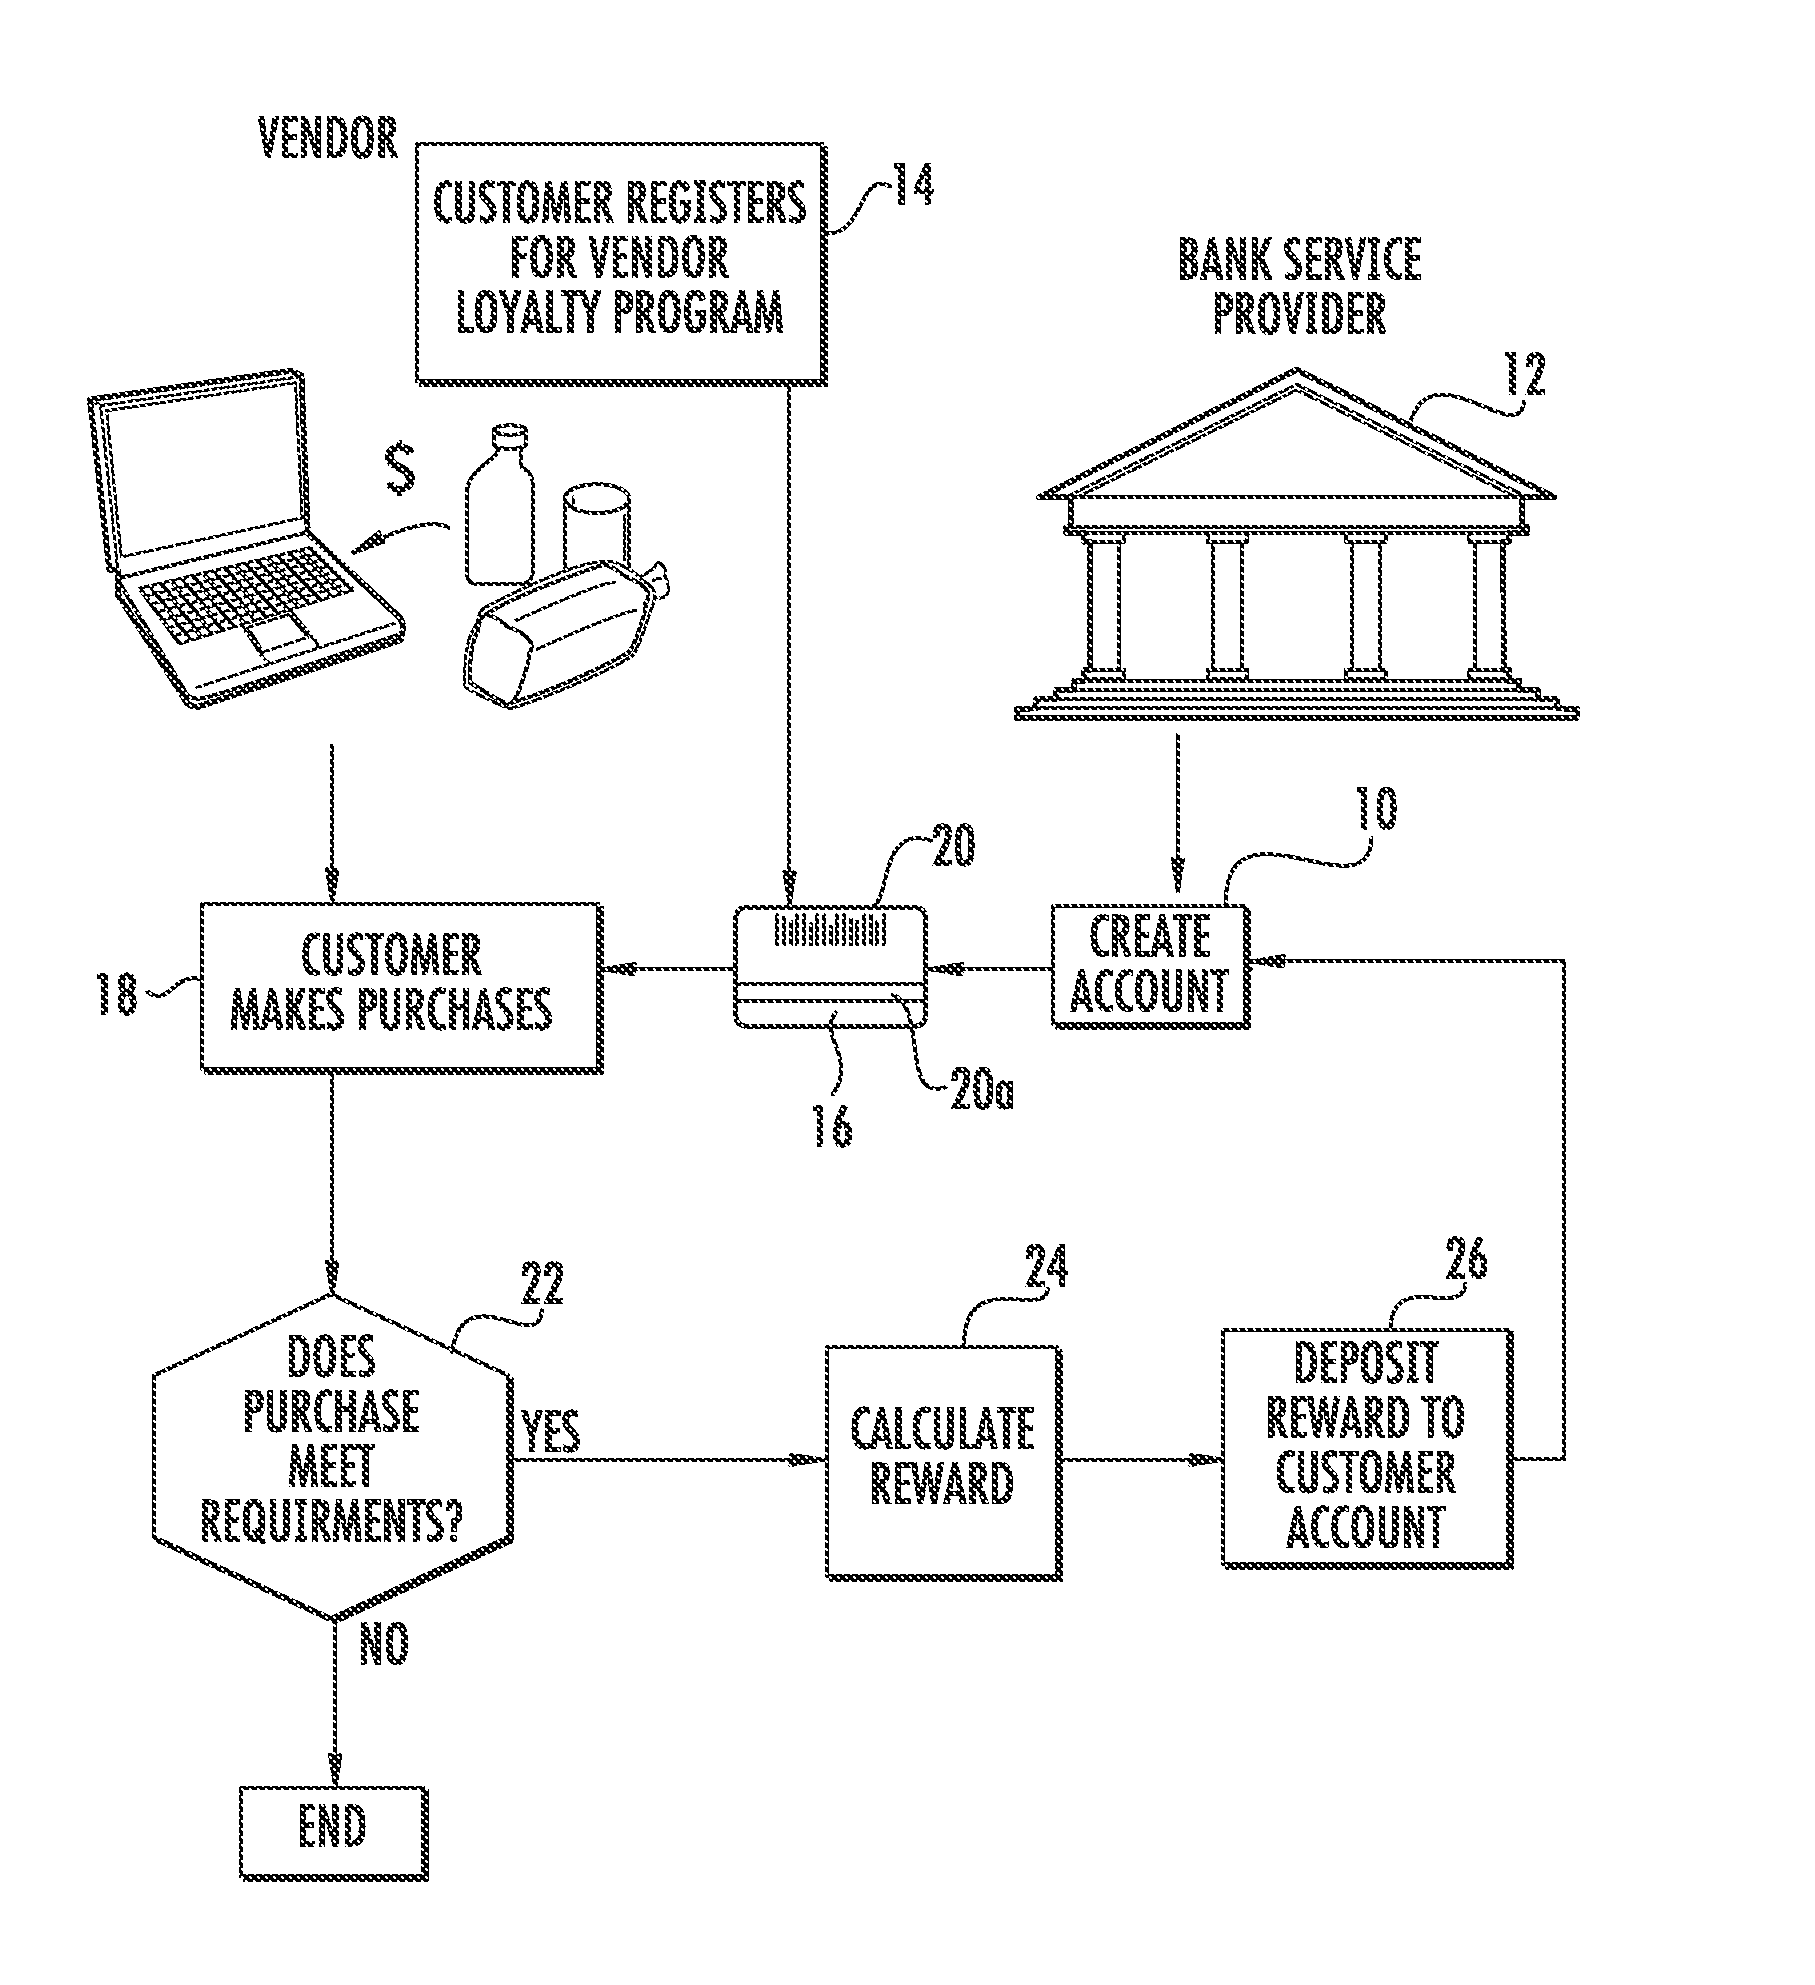 Method of conducting a transaction that results in customer rewards